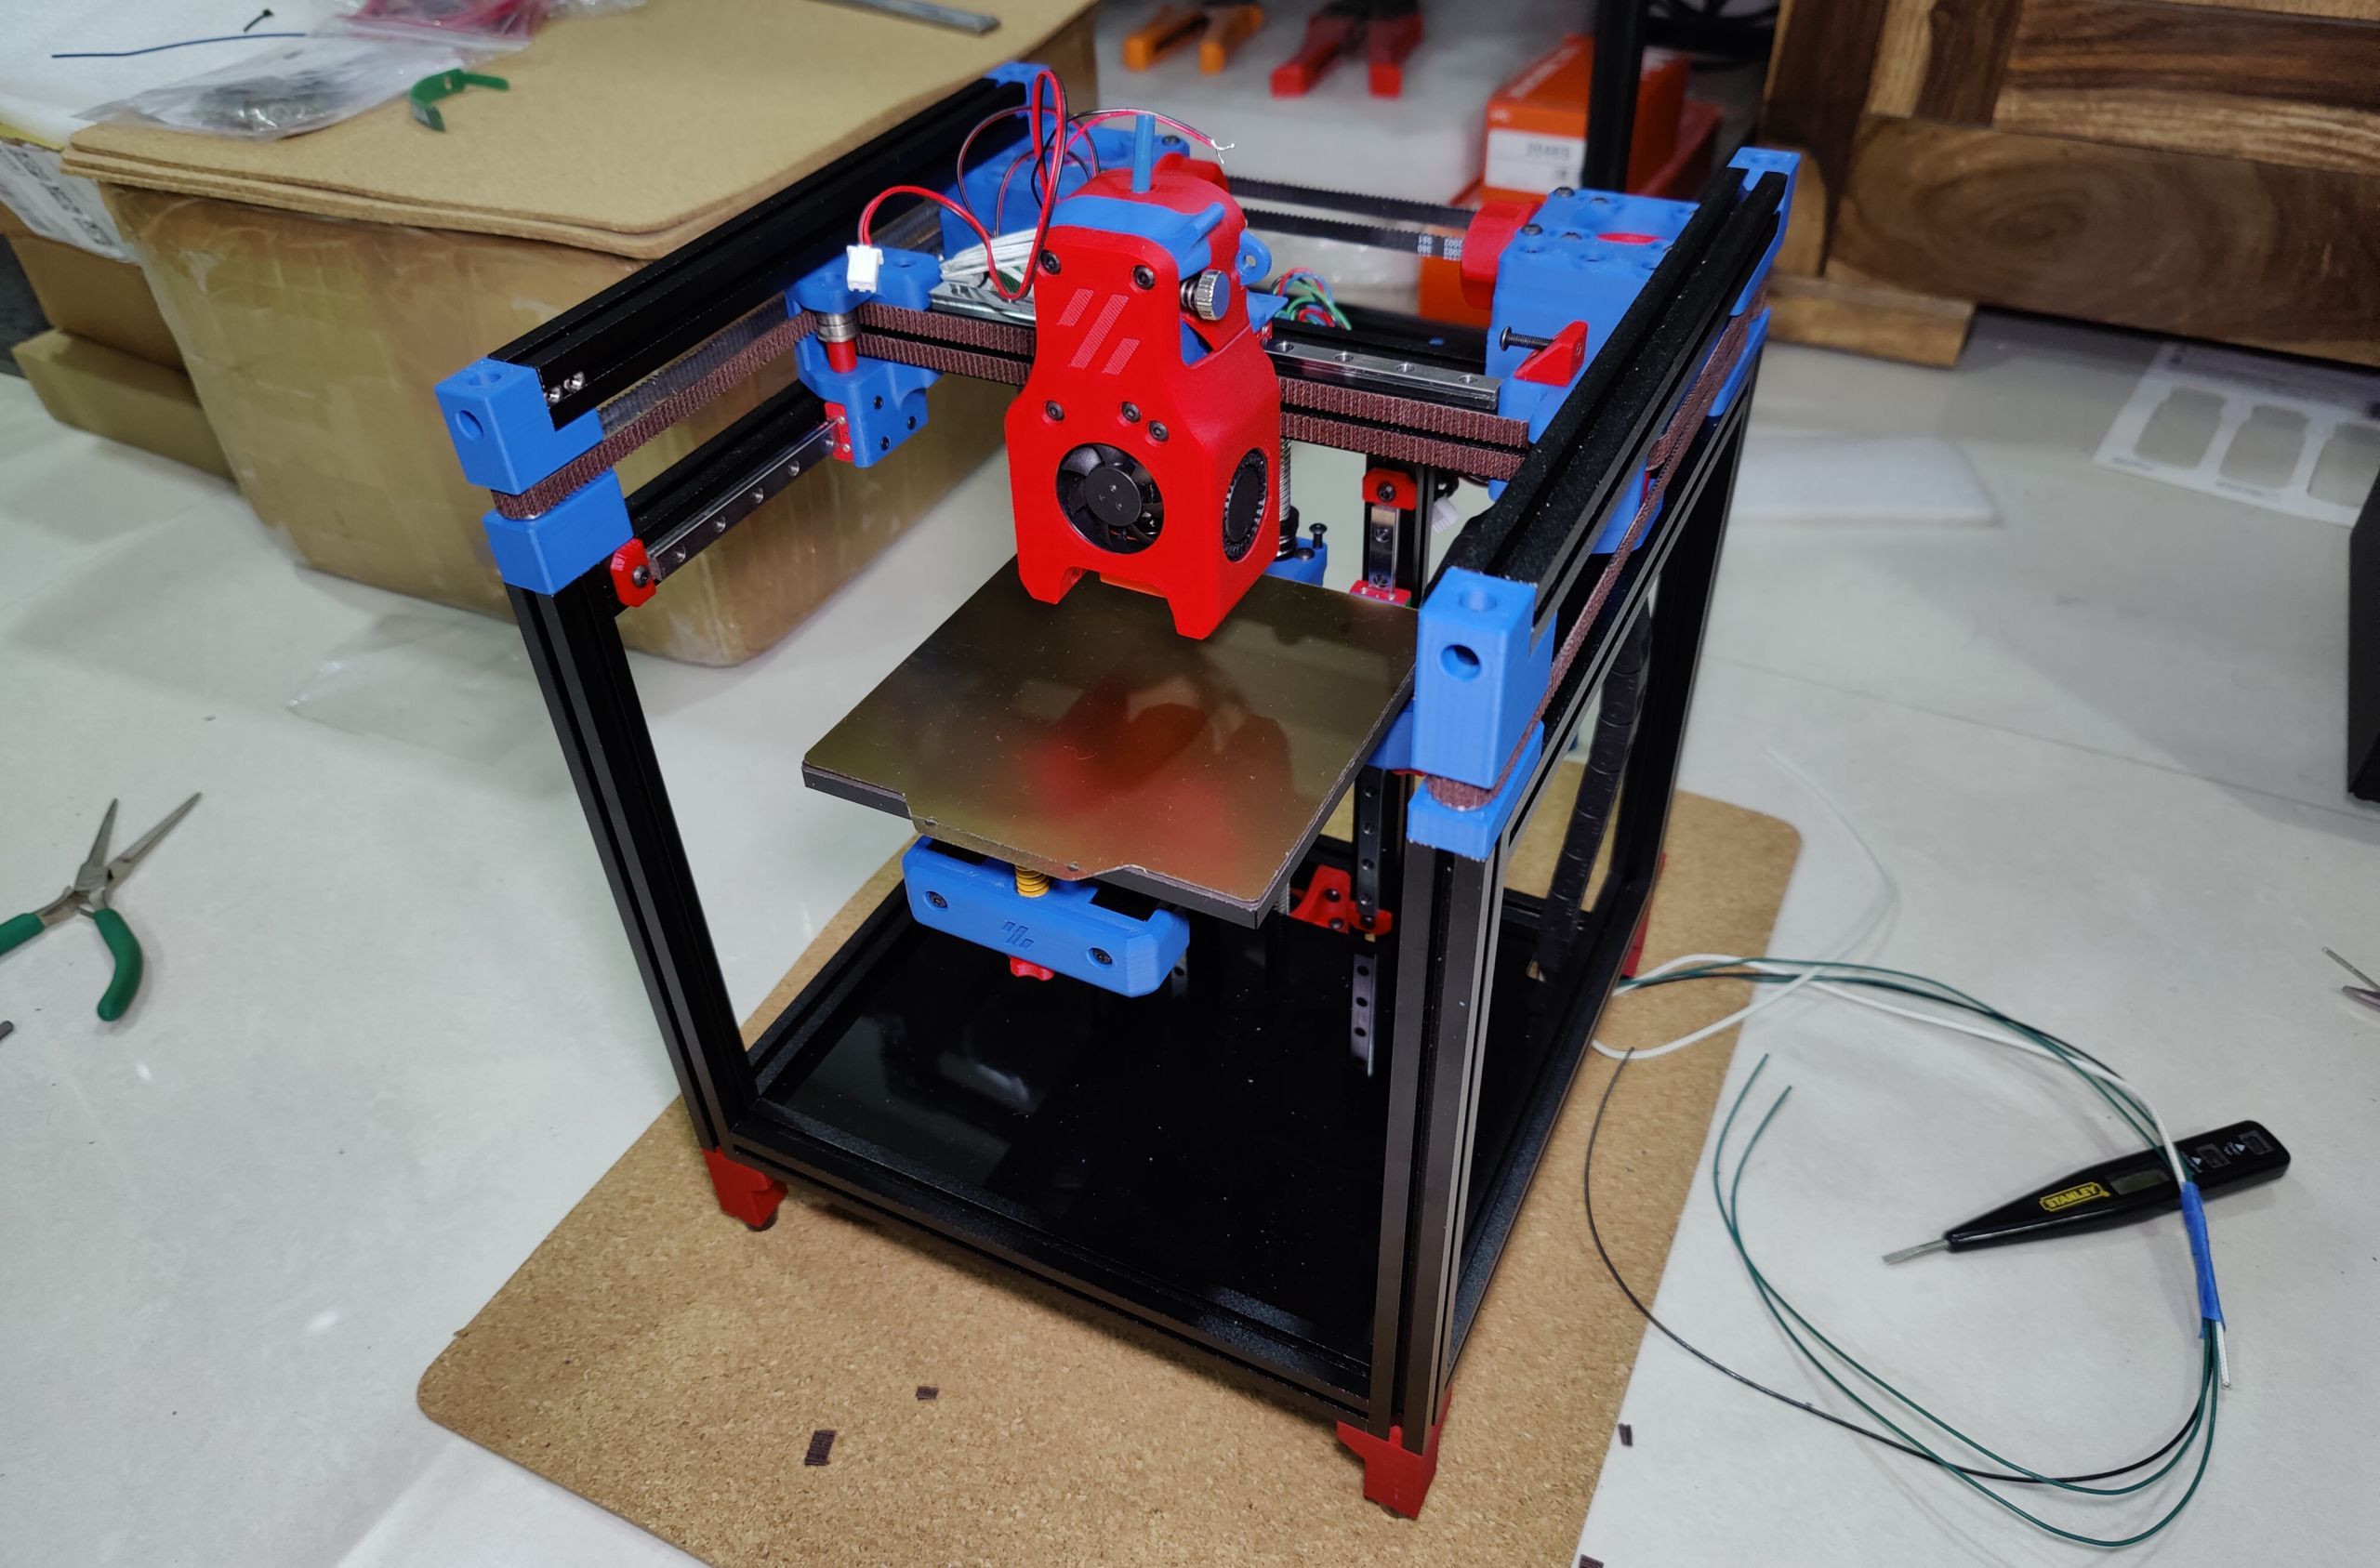 3D Printer Bed Mod Disassembly